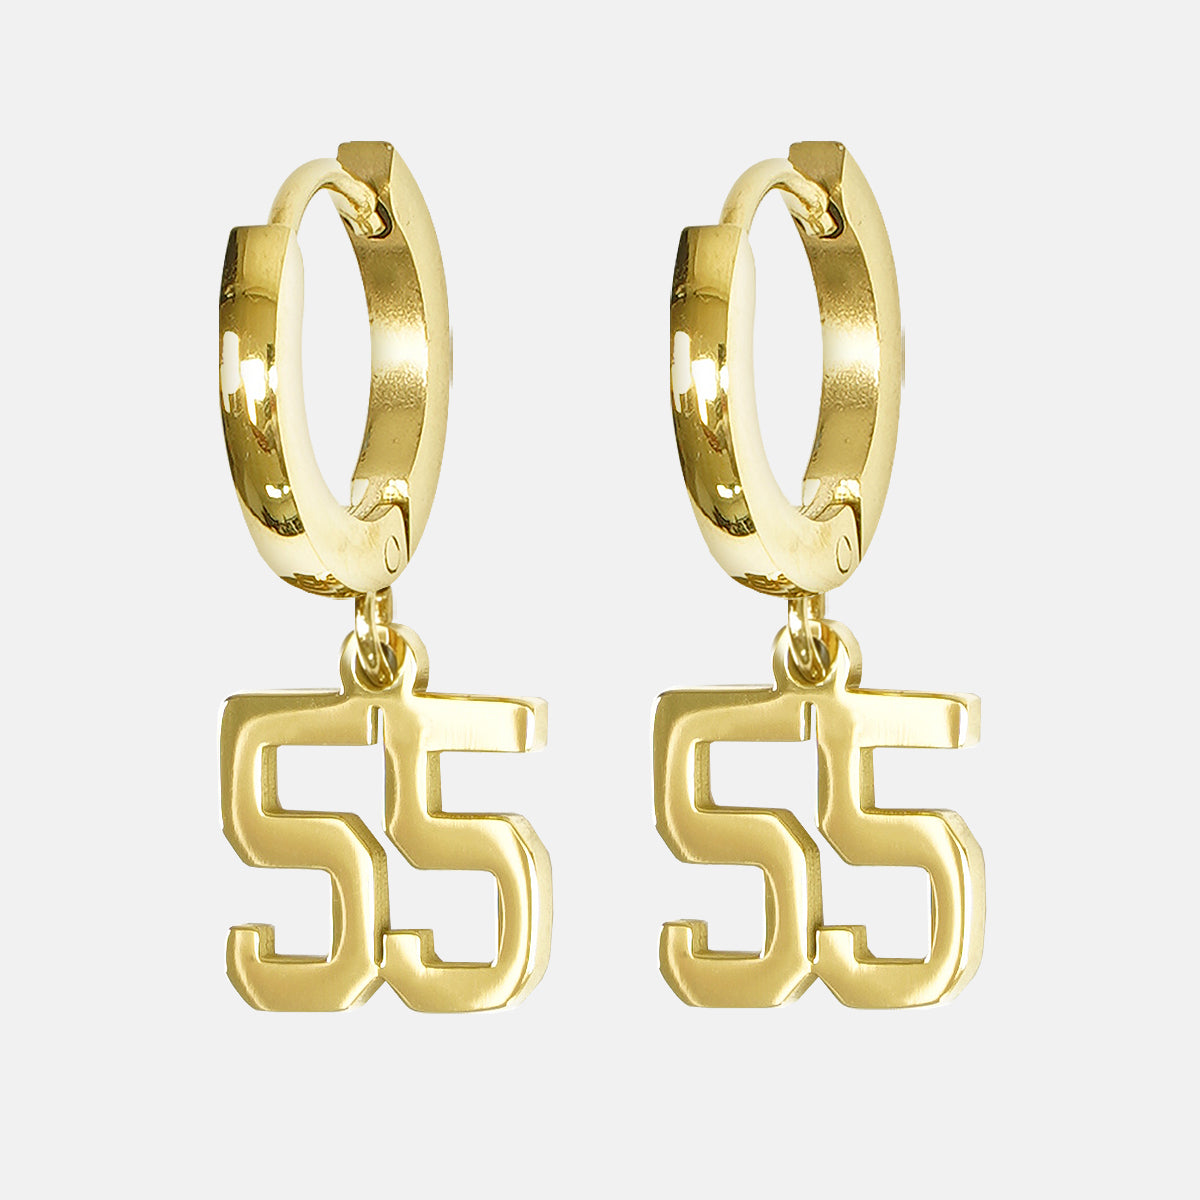 55 Number Earring - Gold Plated Stainless Steel